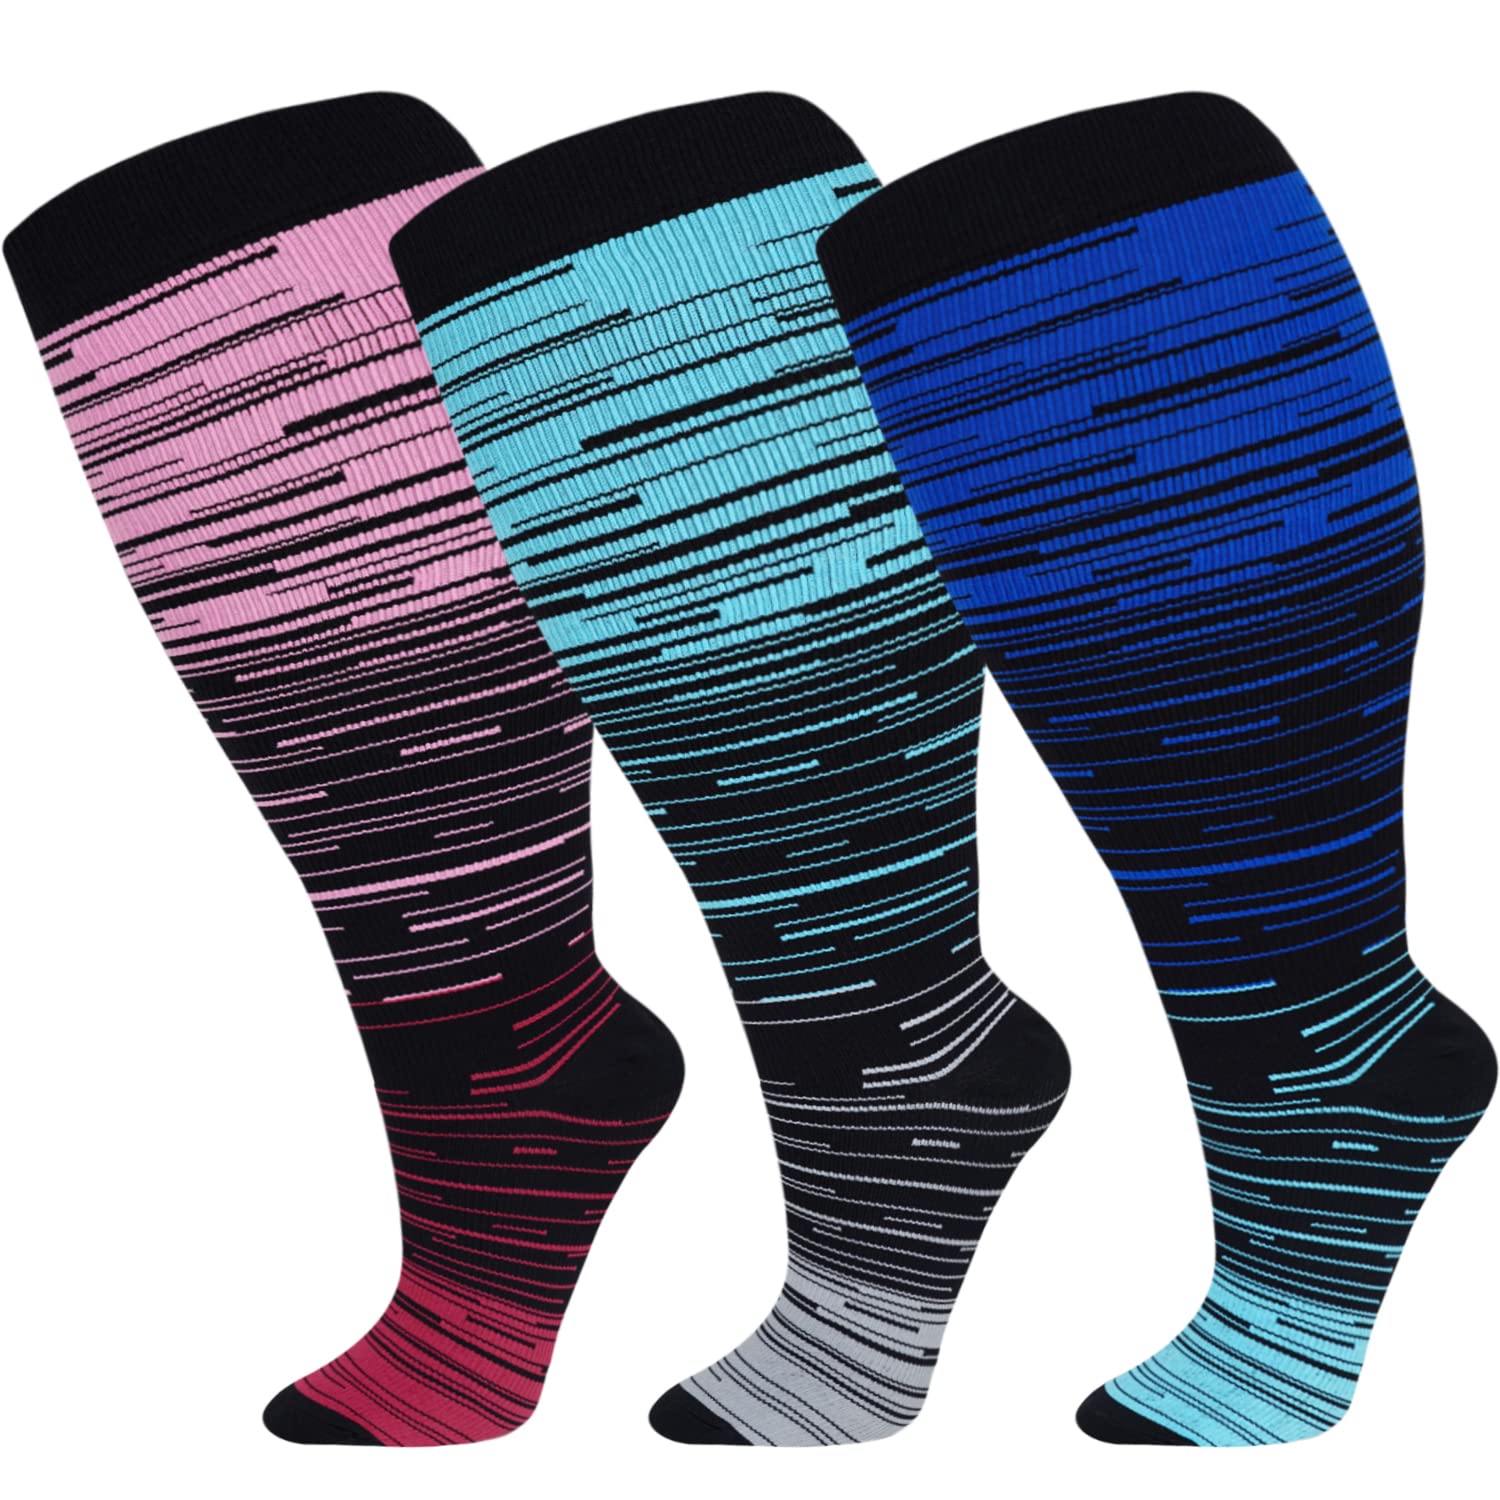 3XL Extra Wide Compression Leggings for Swelling 20-30mmHg